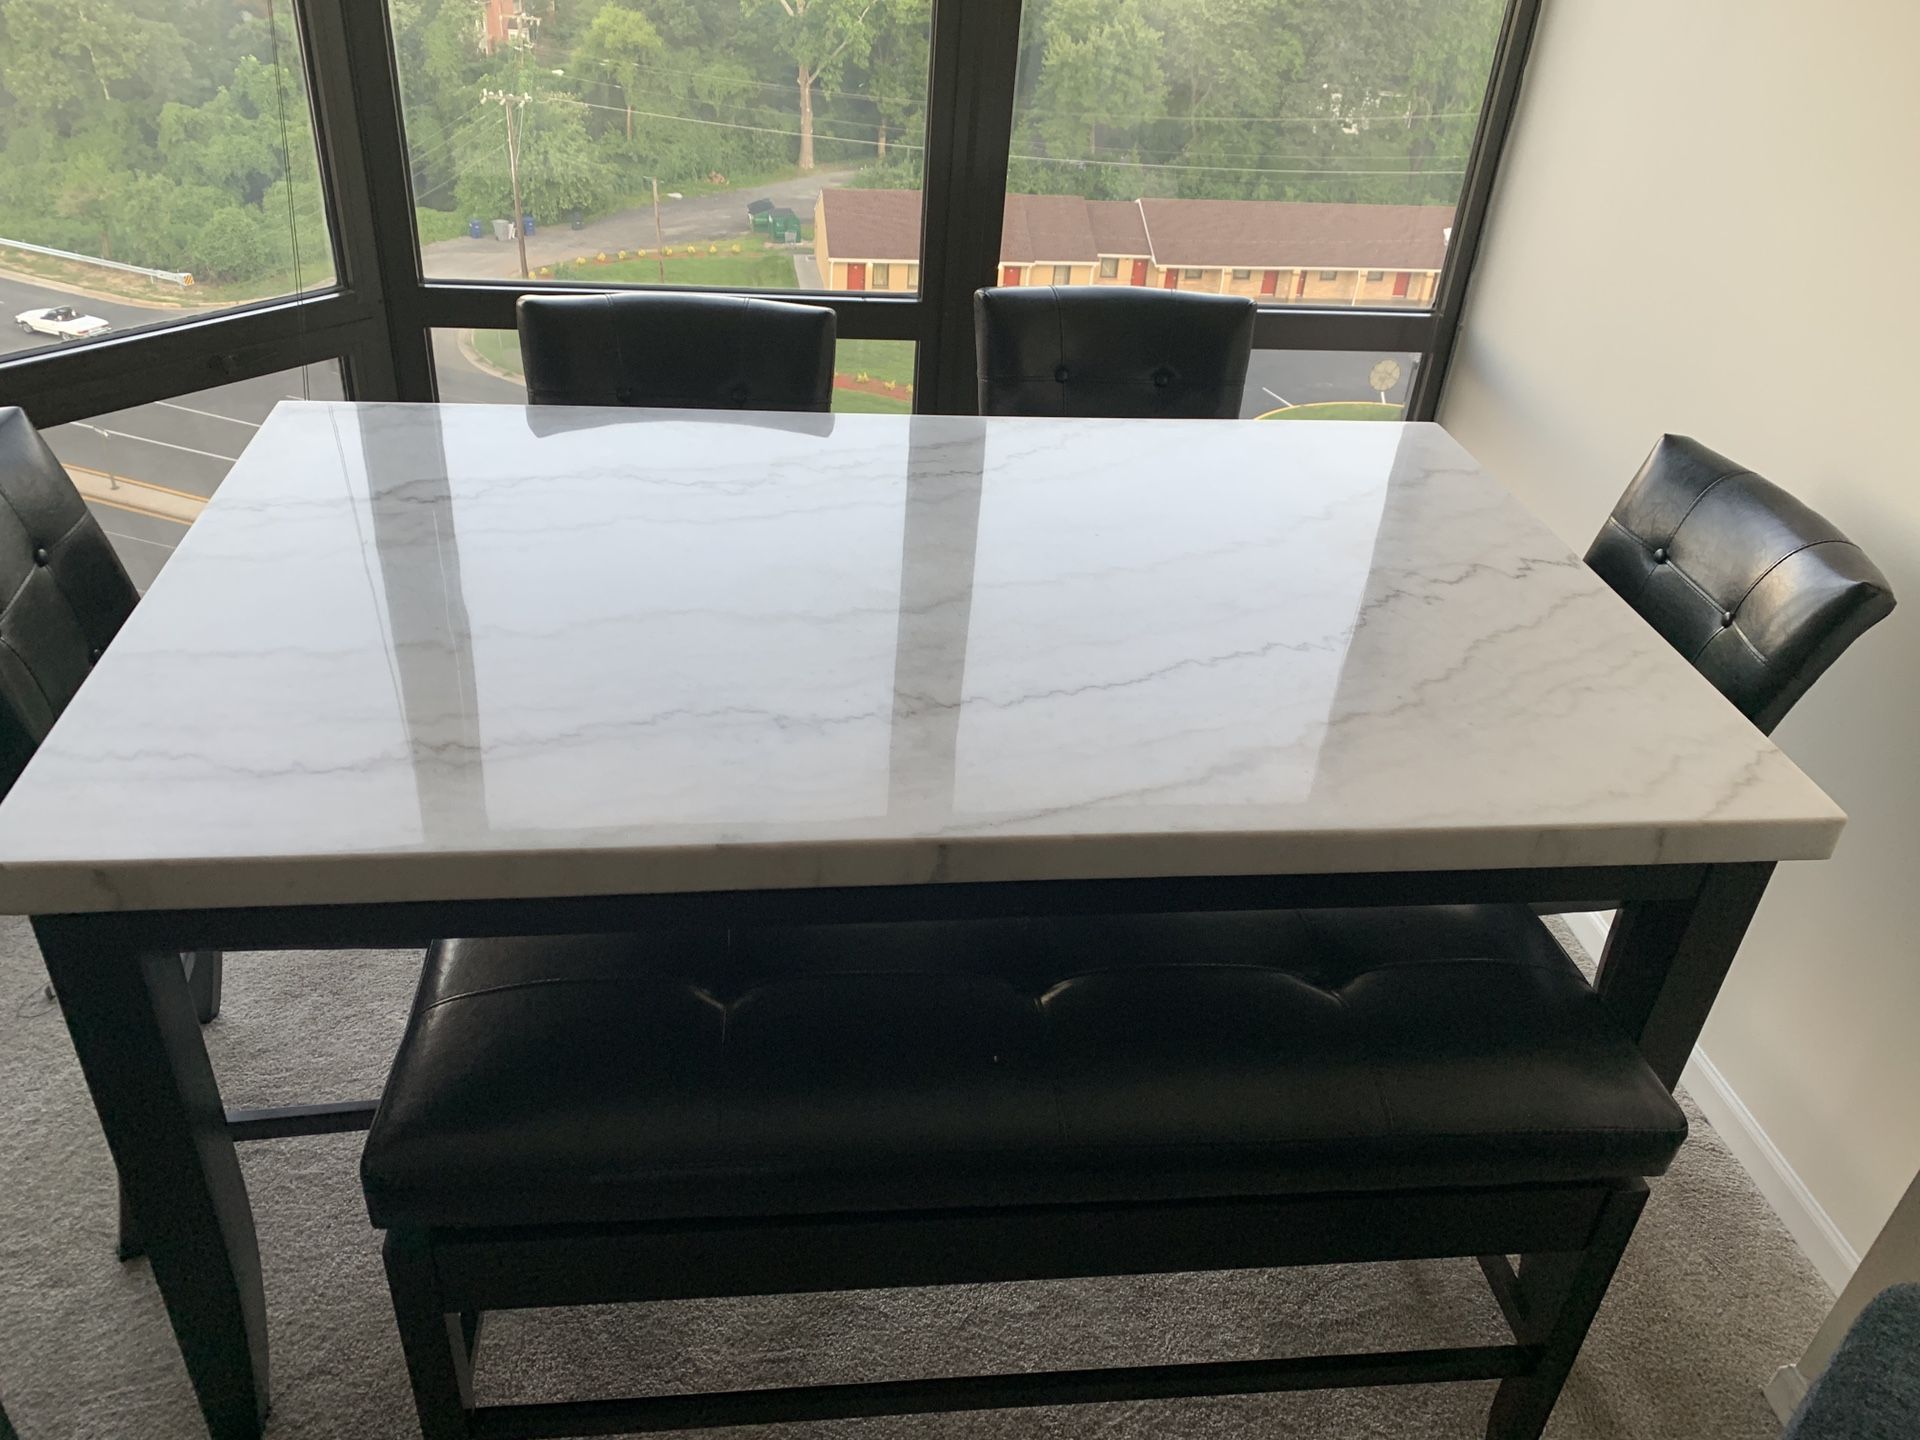 Counter height marble table with 4 chairs and 1 bench with storage